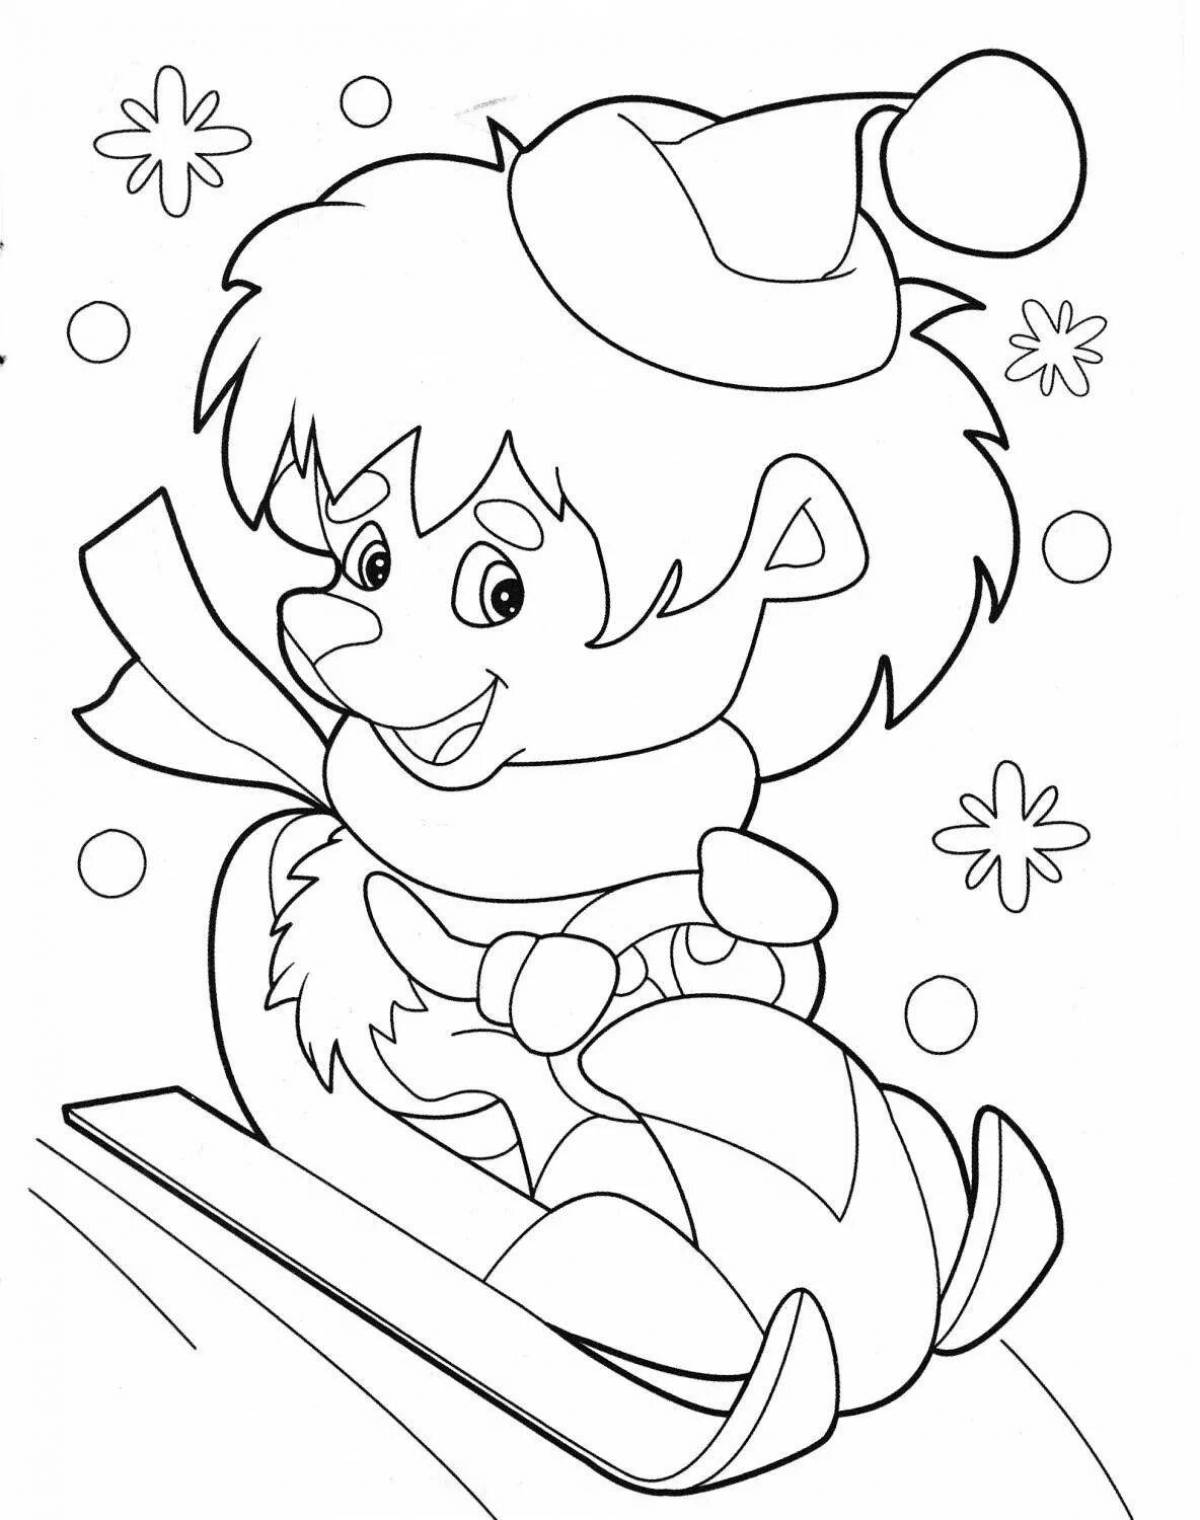 Coloring book exciting new year characters